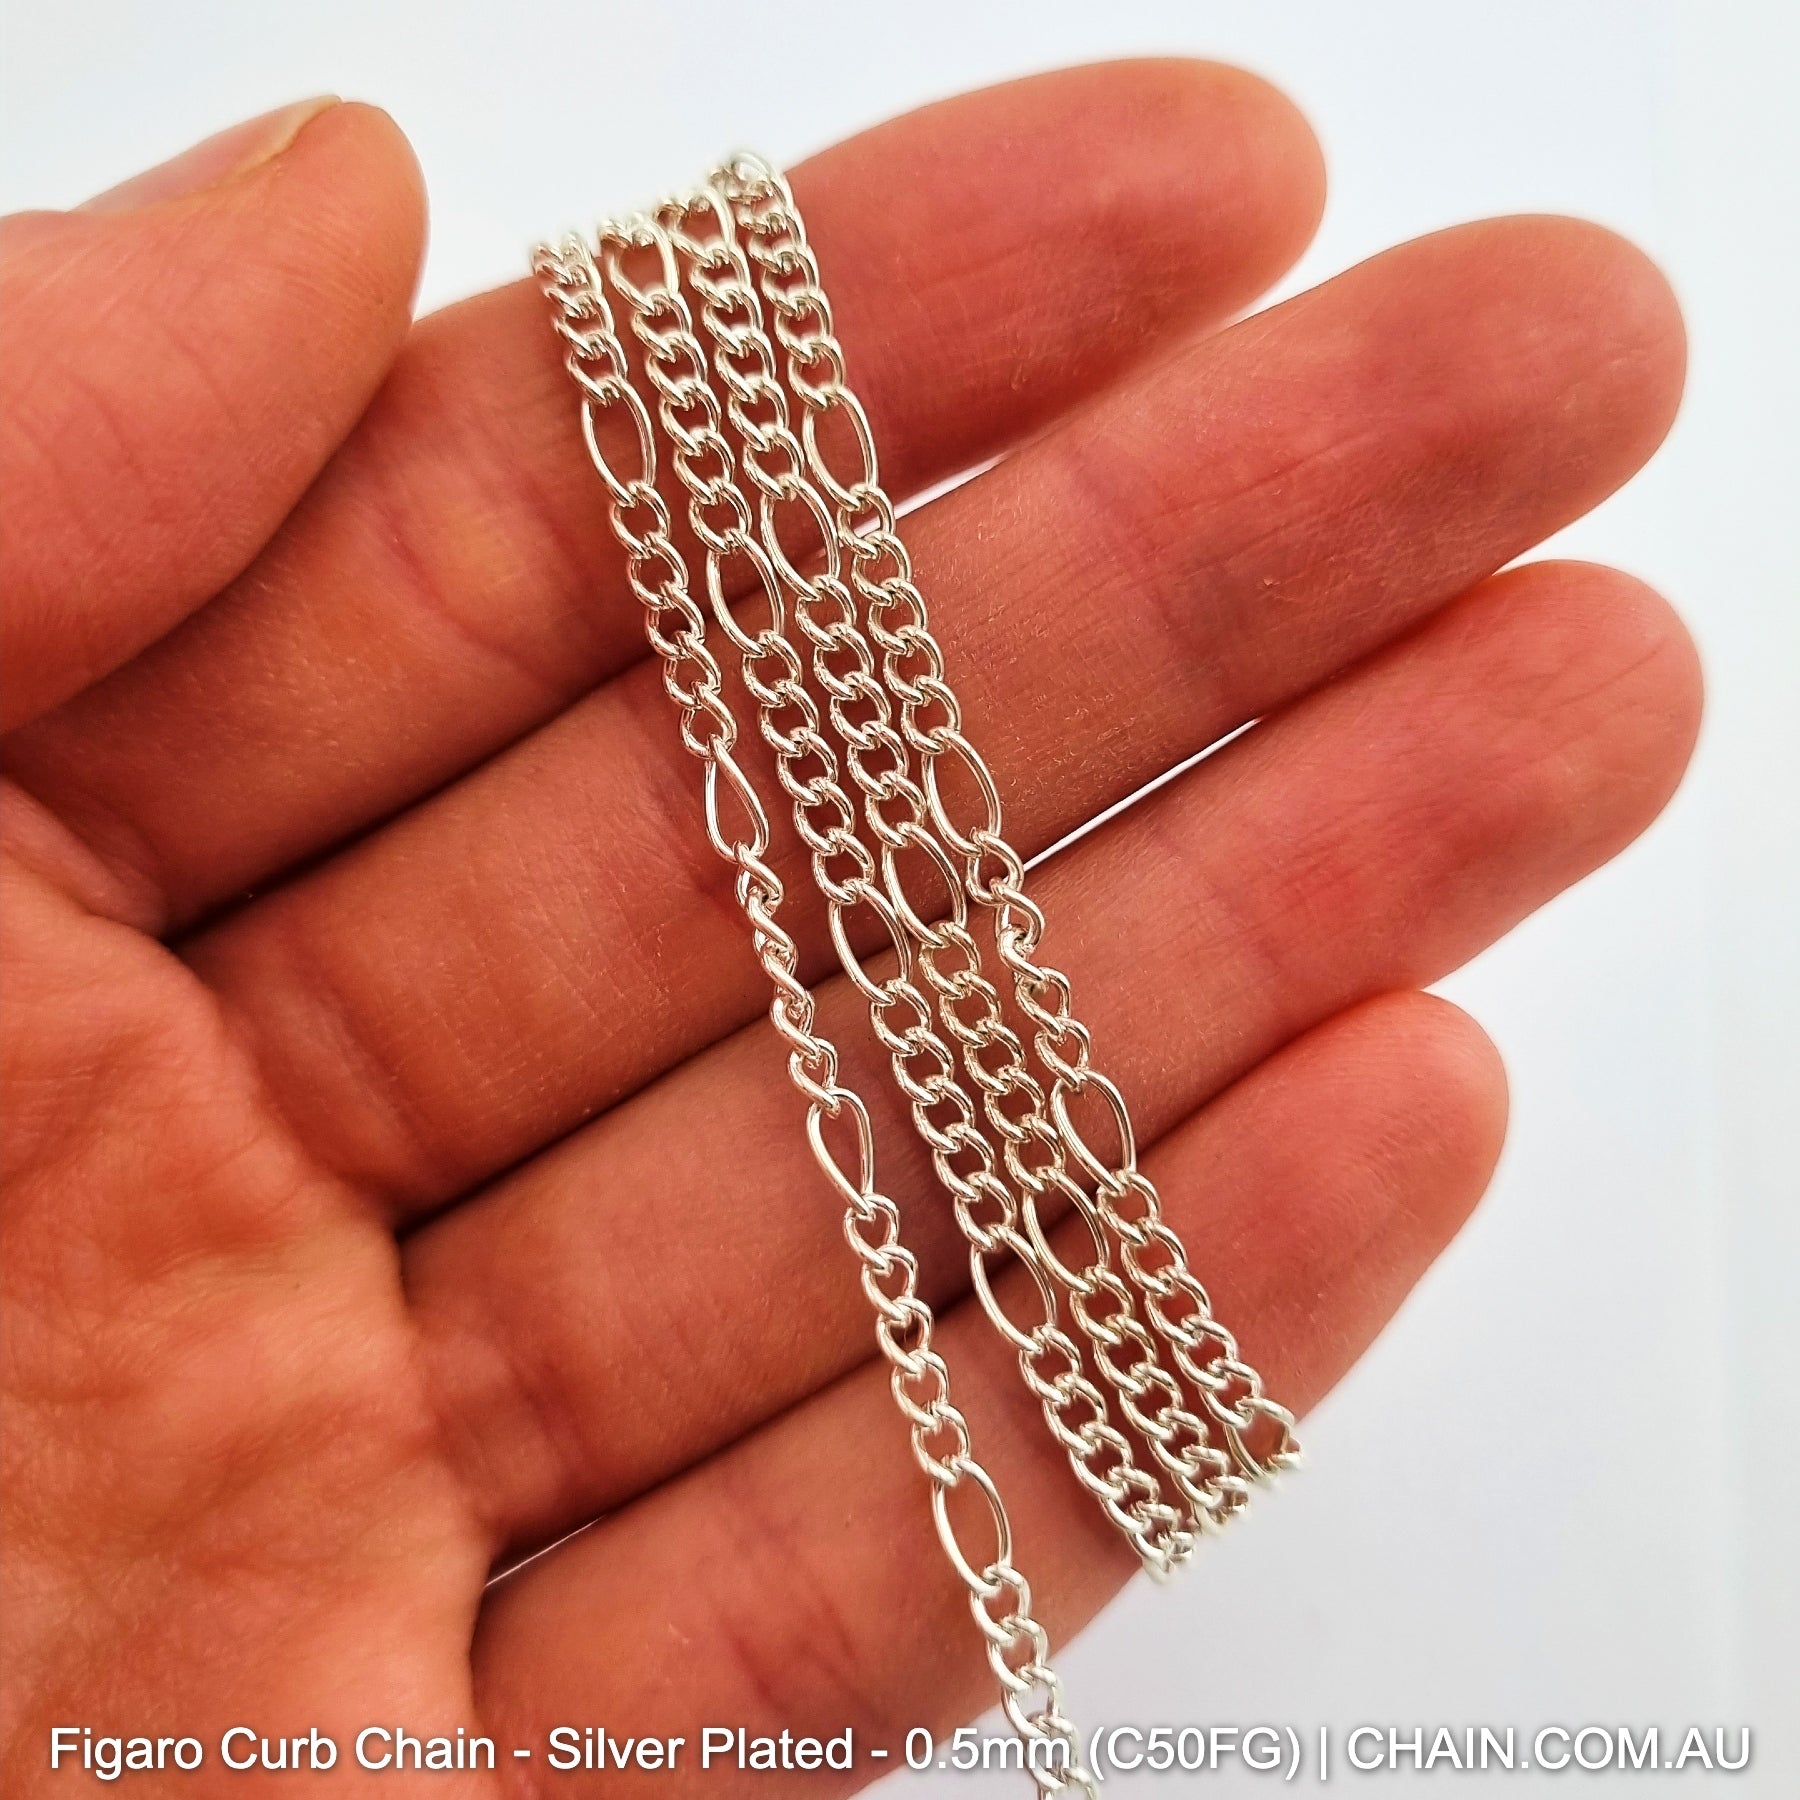 Figaro Curb Chain Silver Plated. Size: 0.5mm, C50FG. 25m Reel. Shop Jewellery Chain online. Australia wide shipping. Chain.com.au